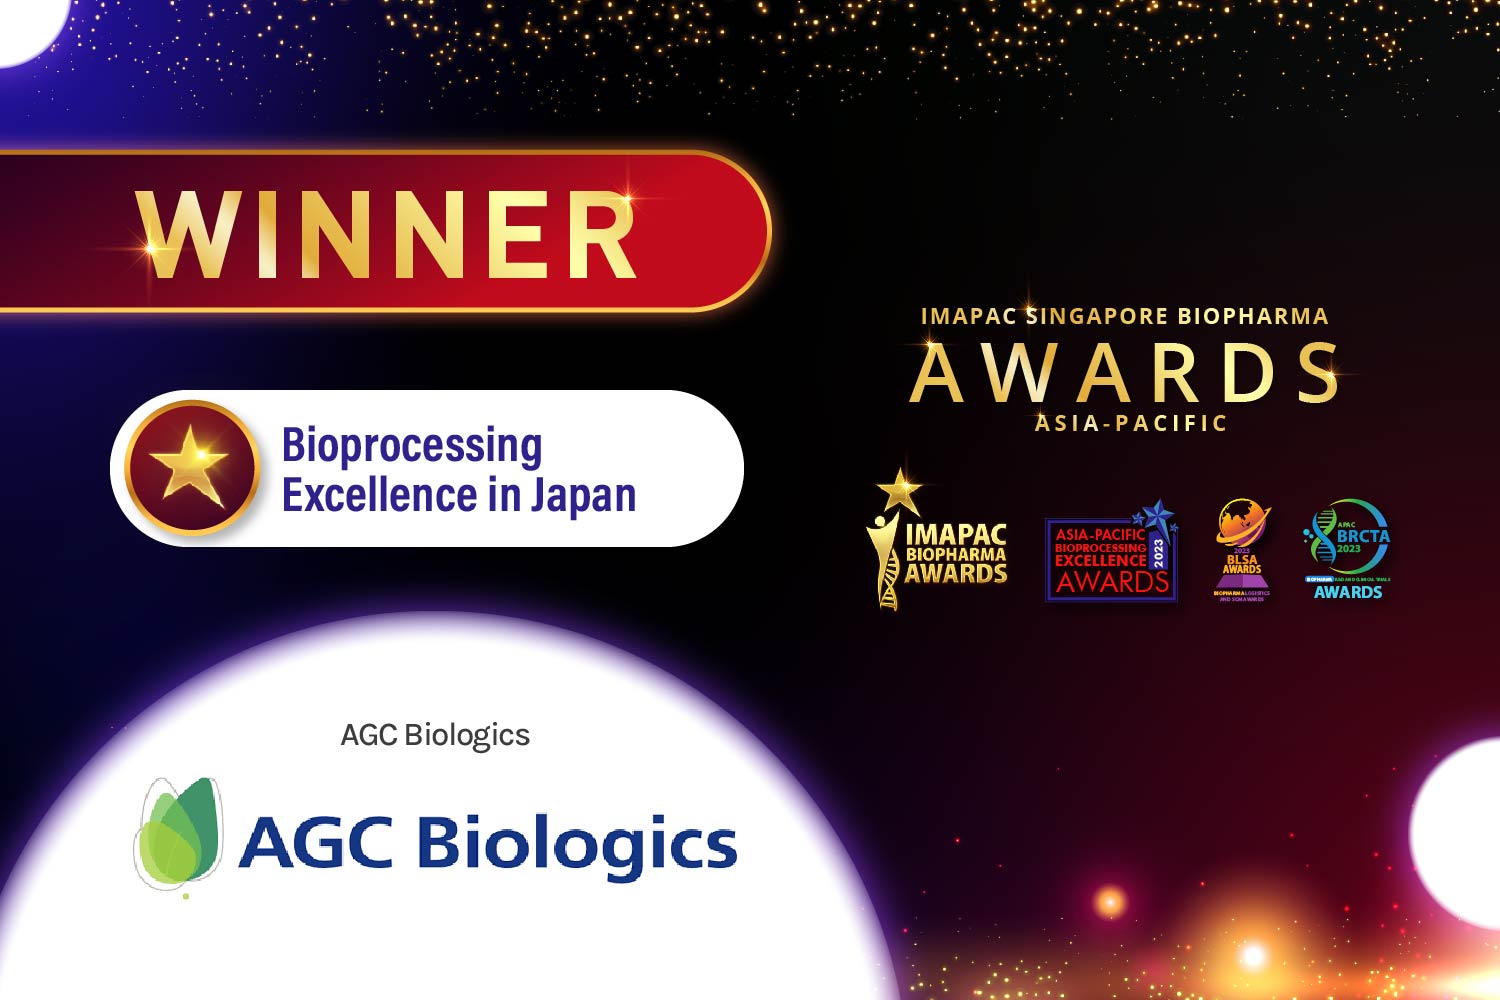 Winner certificate for AGC Biologics being awarded the Bioprocessing Excellence in Japan award.